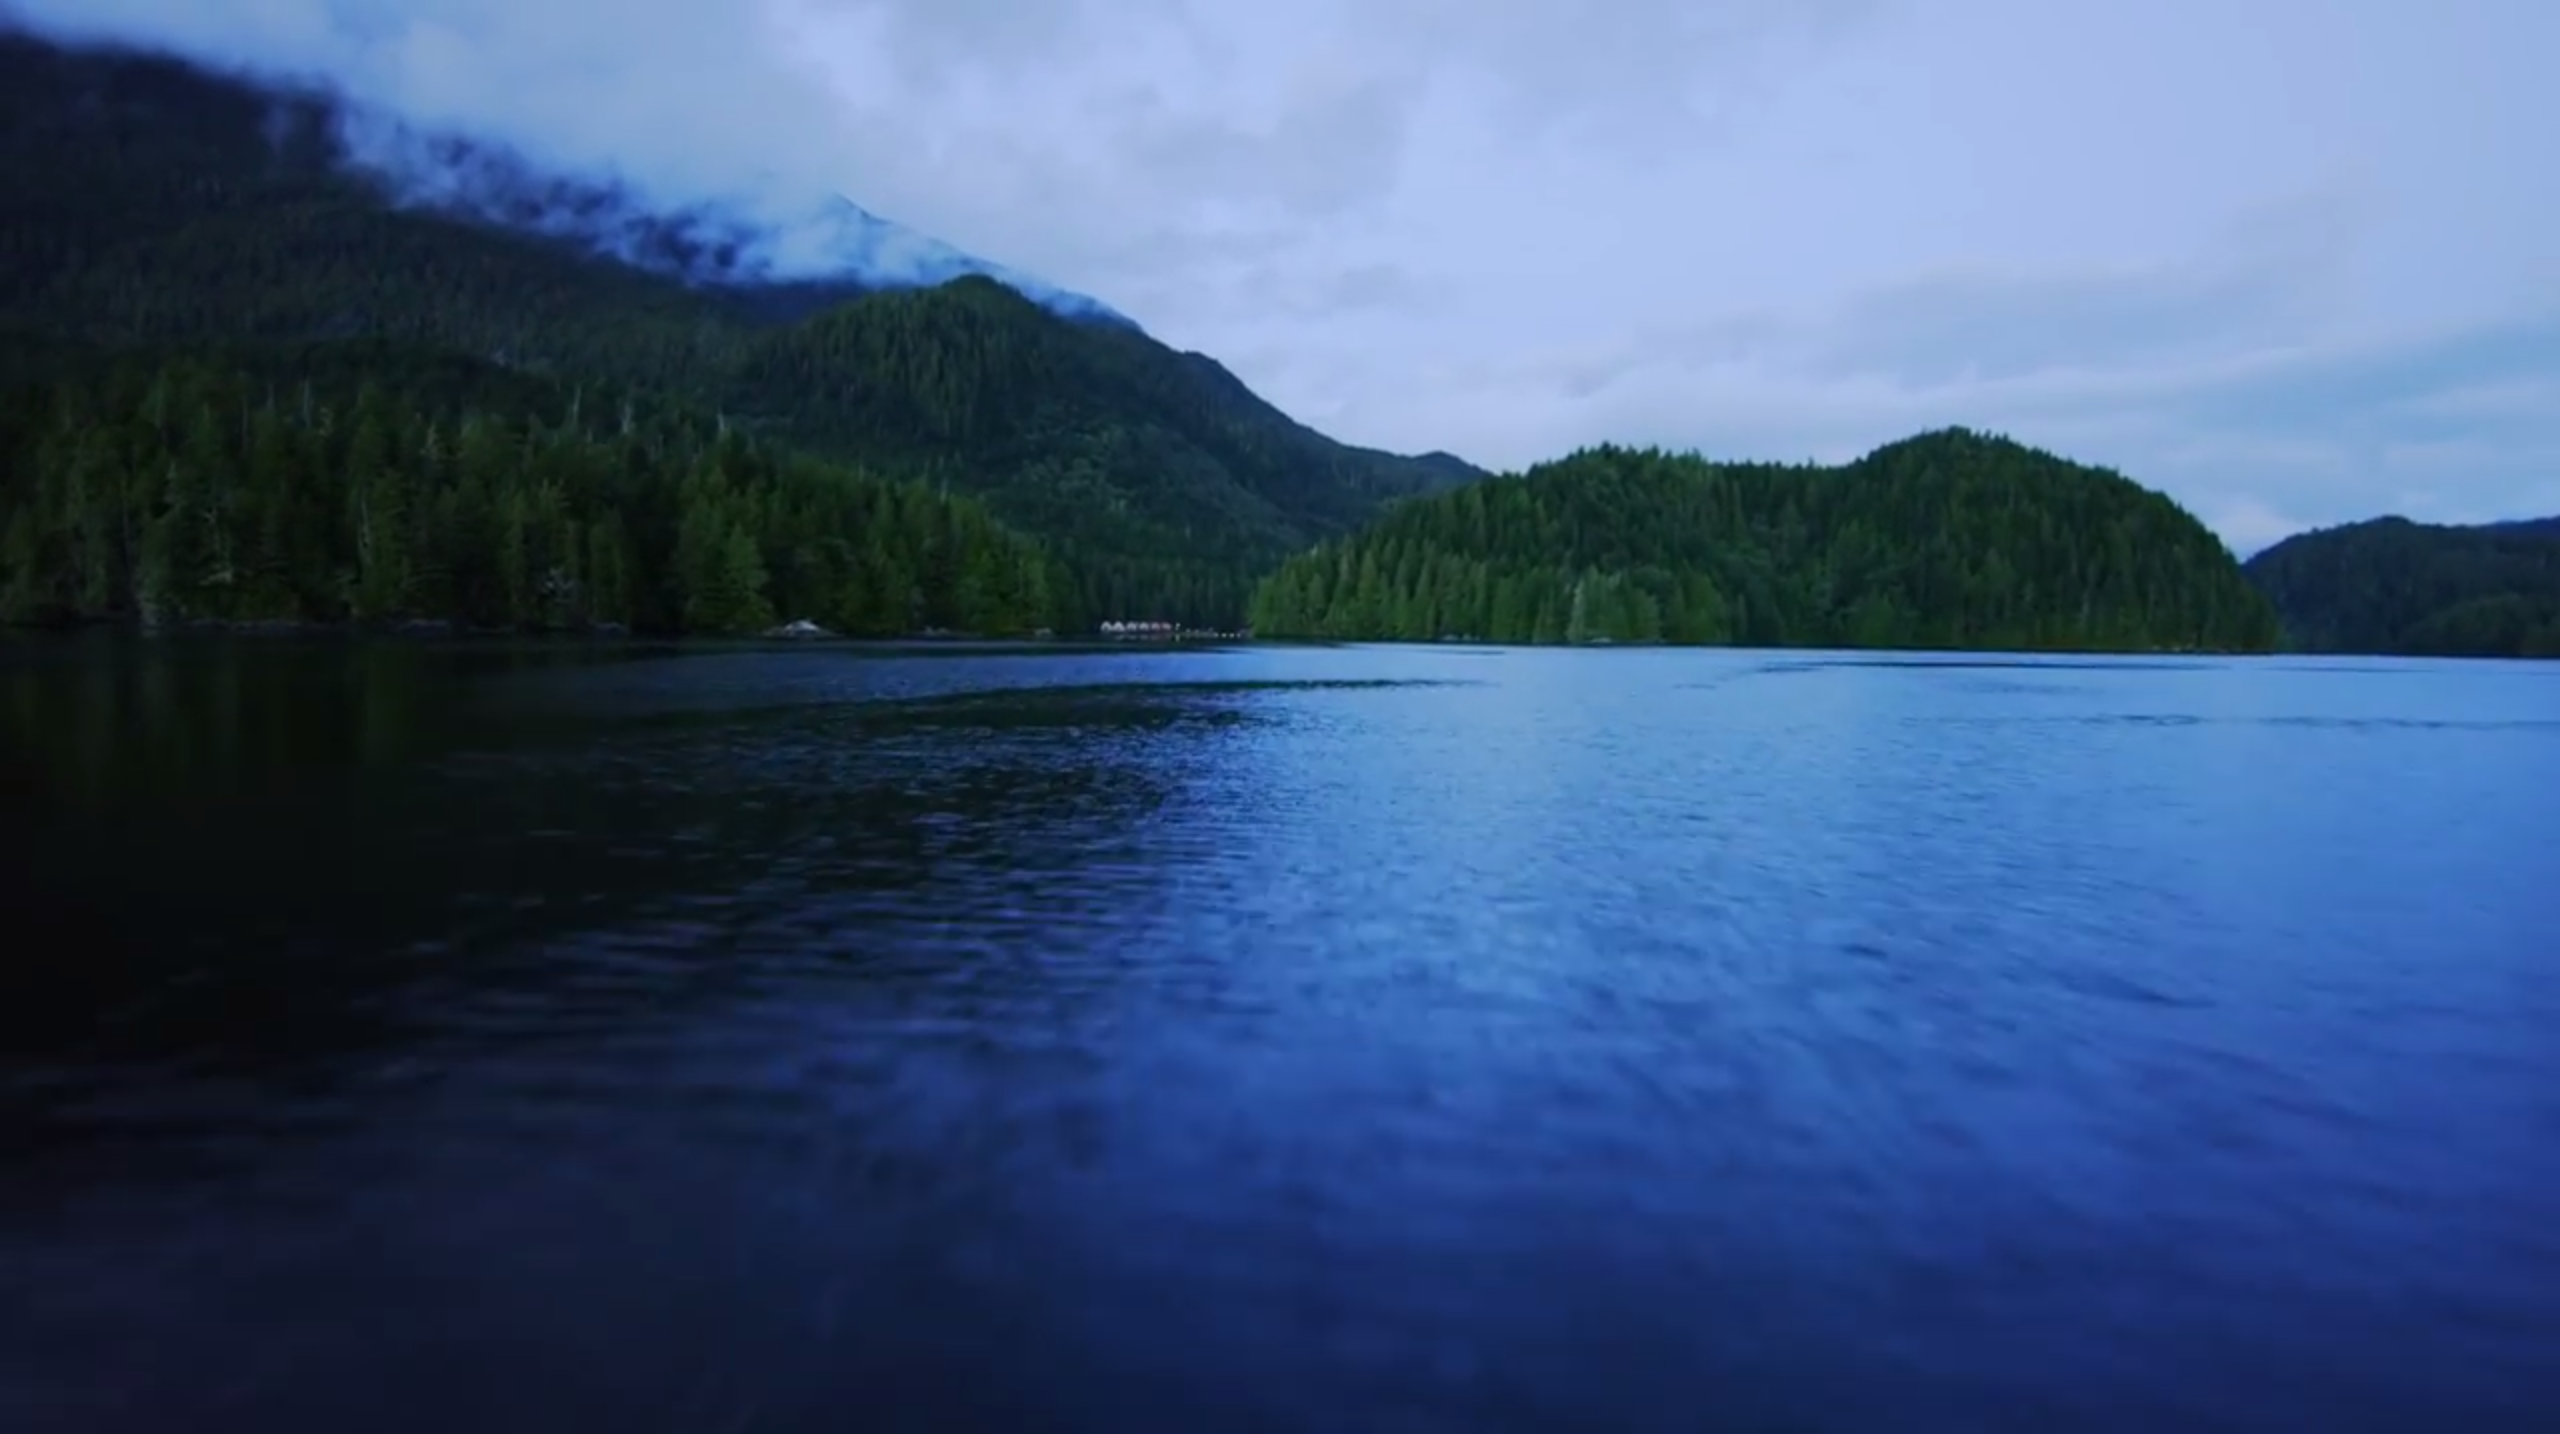 Explore the Great Bear Rainforest in 4k